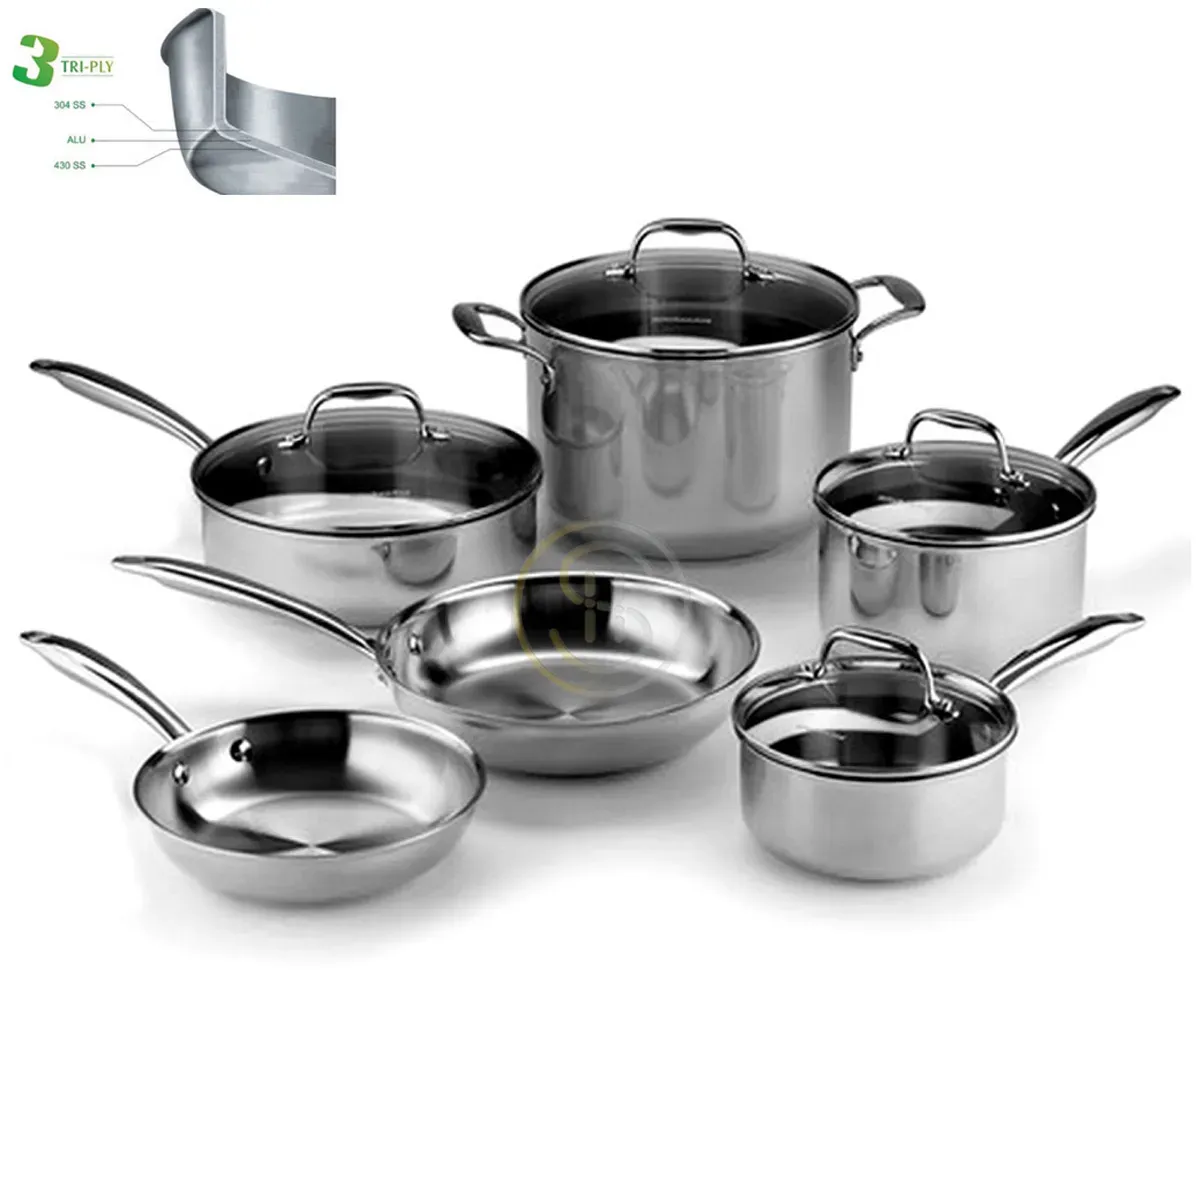 10PCS 3PLY All CLAD BODY INDUCTION COOKWARE SET